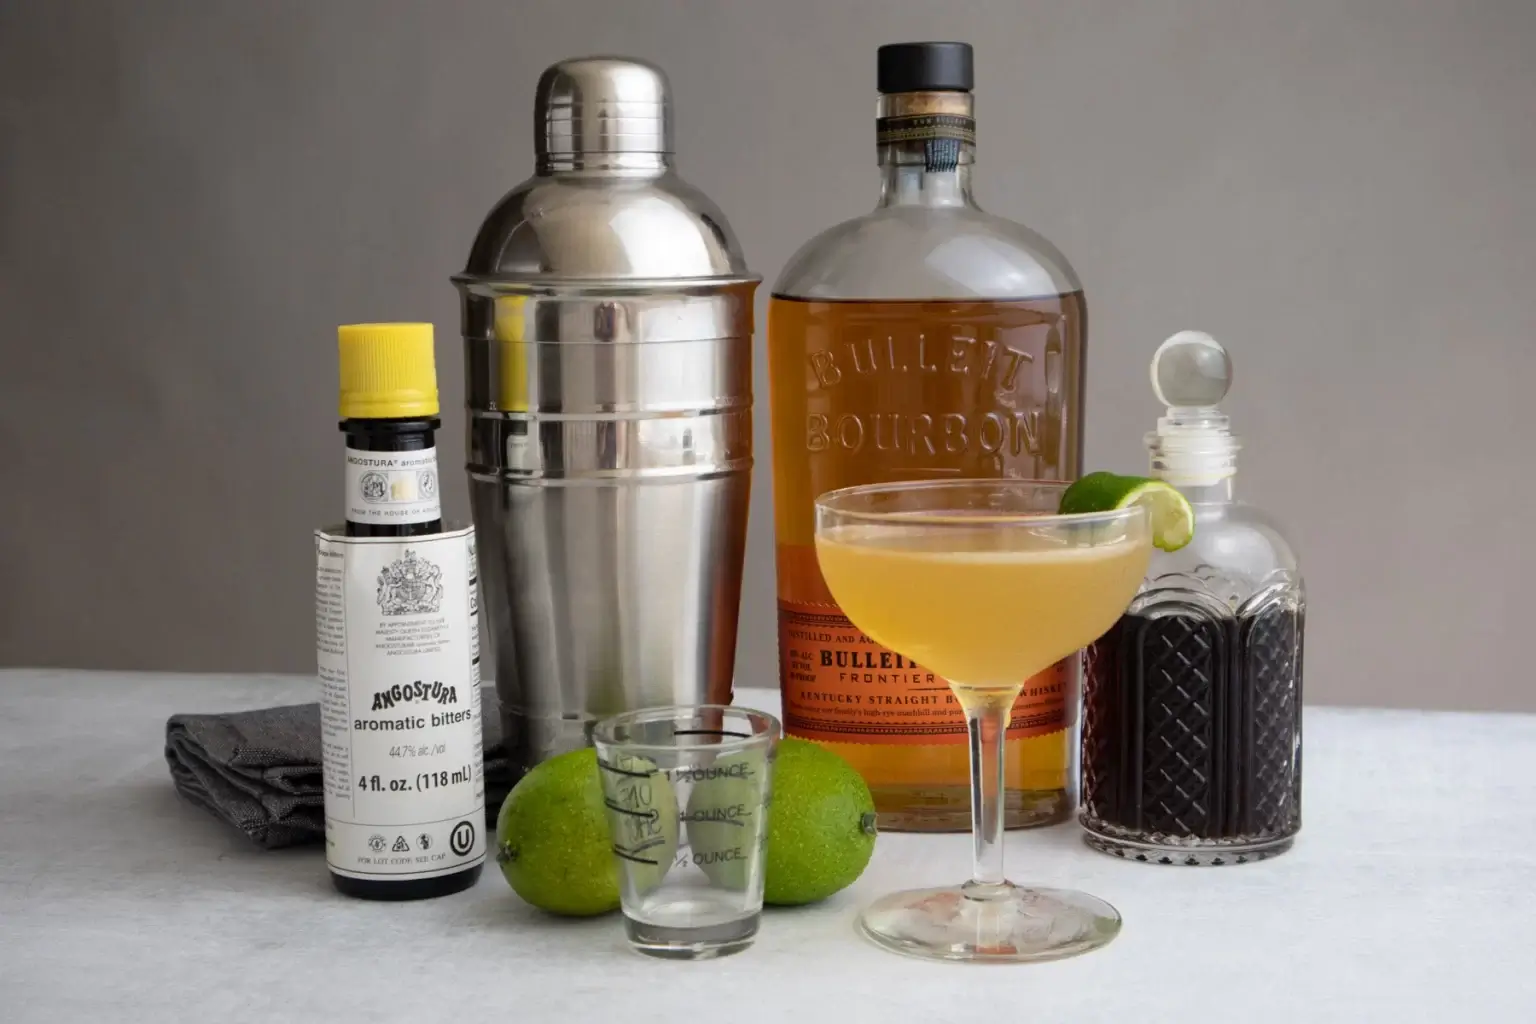 Simple allspice dram cocktail made with bourbon